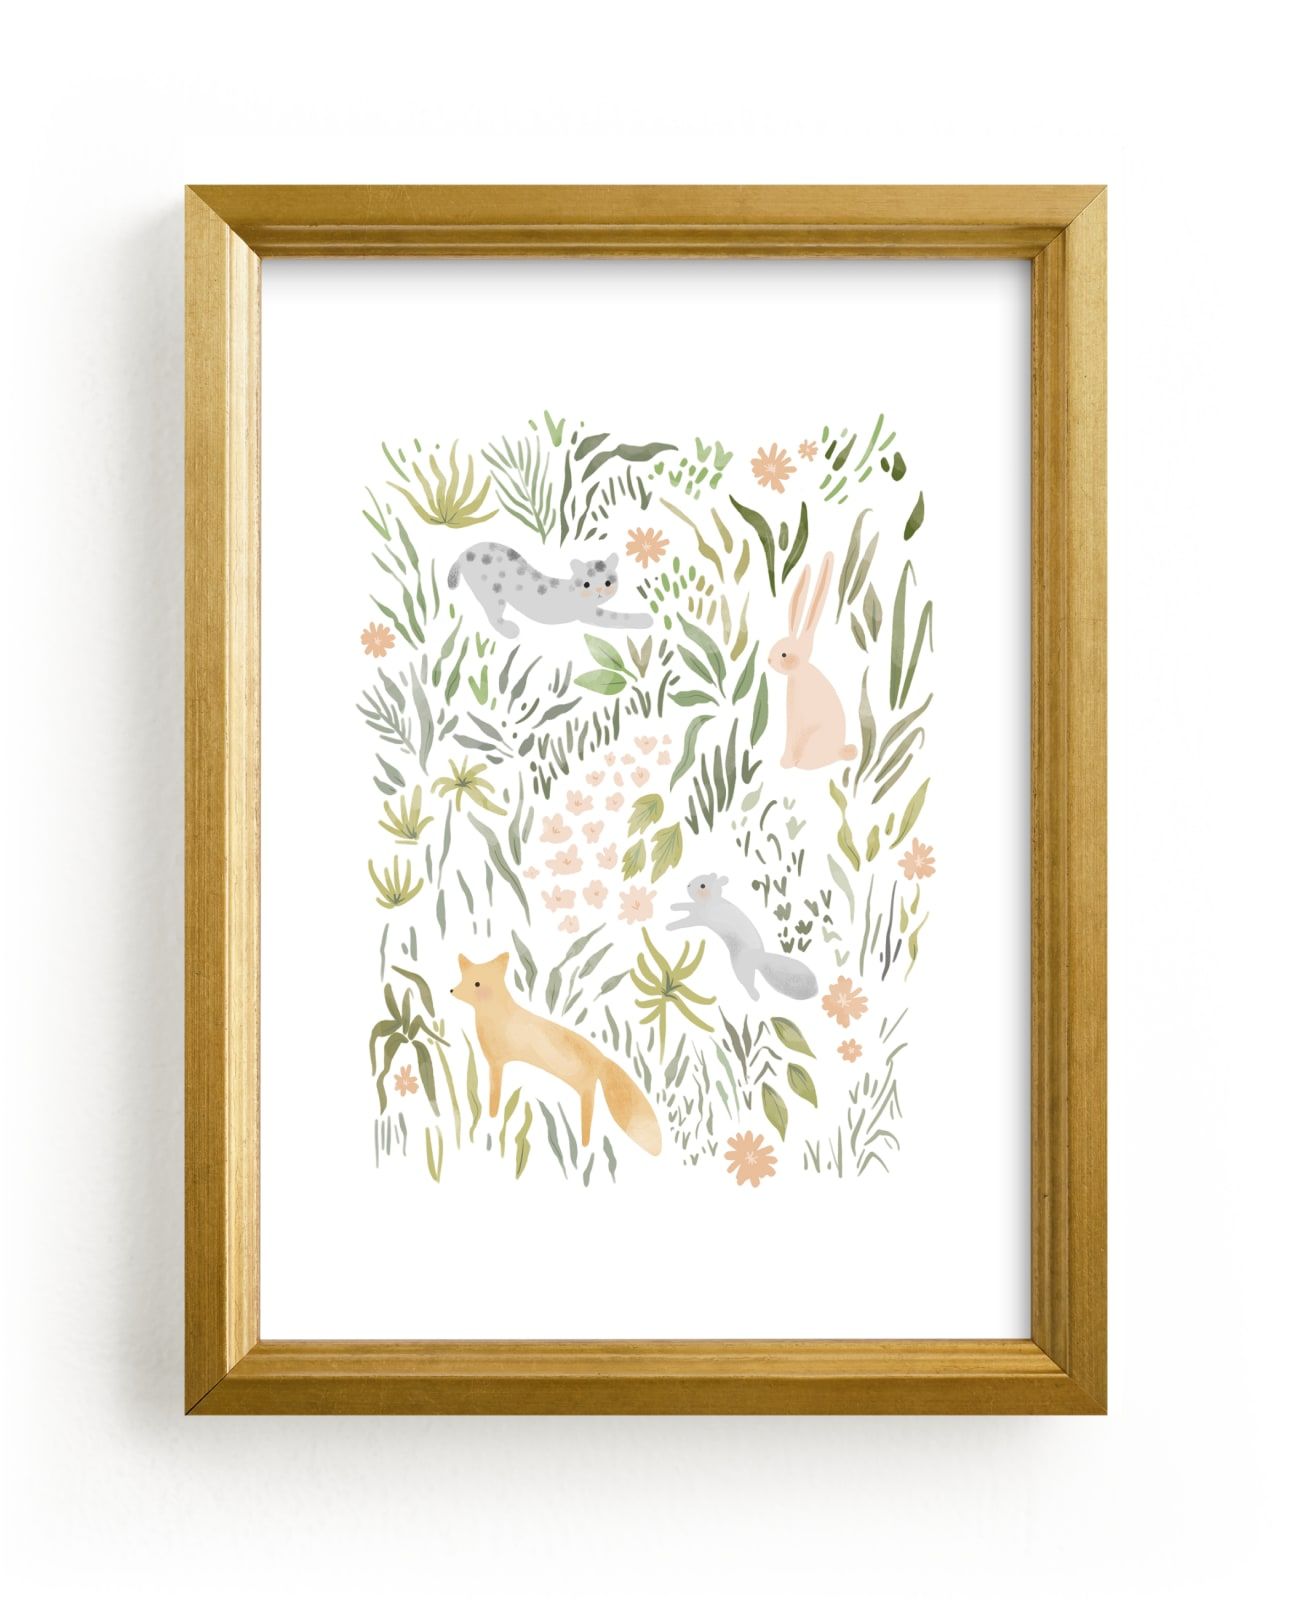 "Flora and Fauna" - Open Edition Children's Art Print by Hannah Williams. | Minted